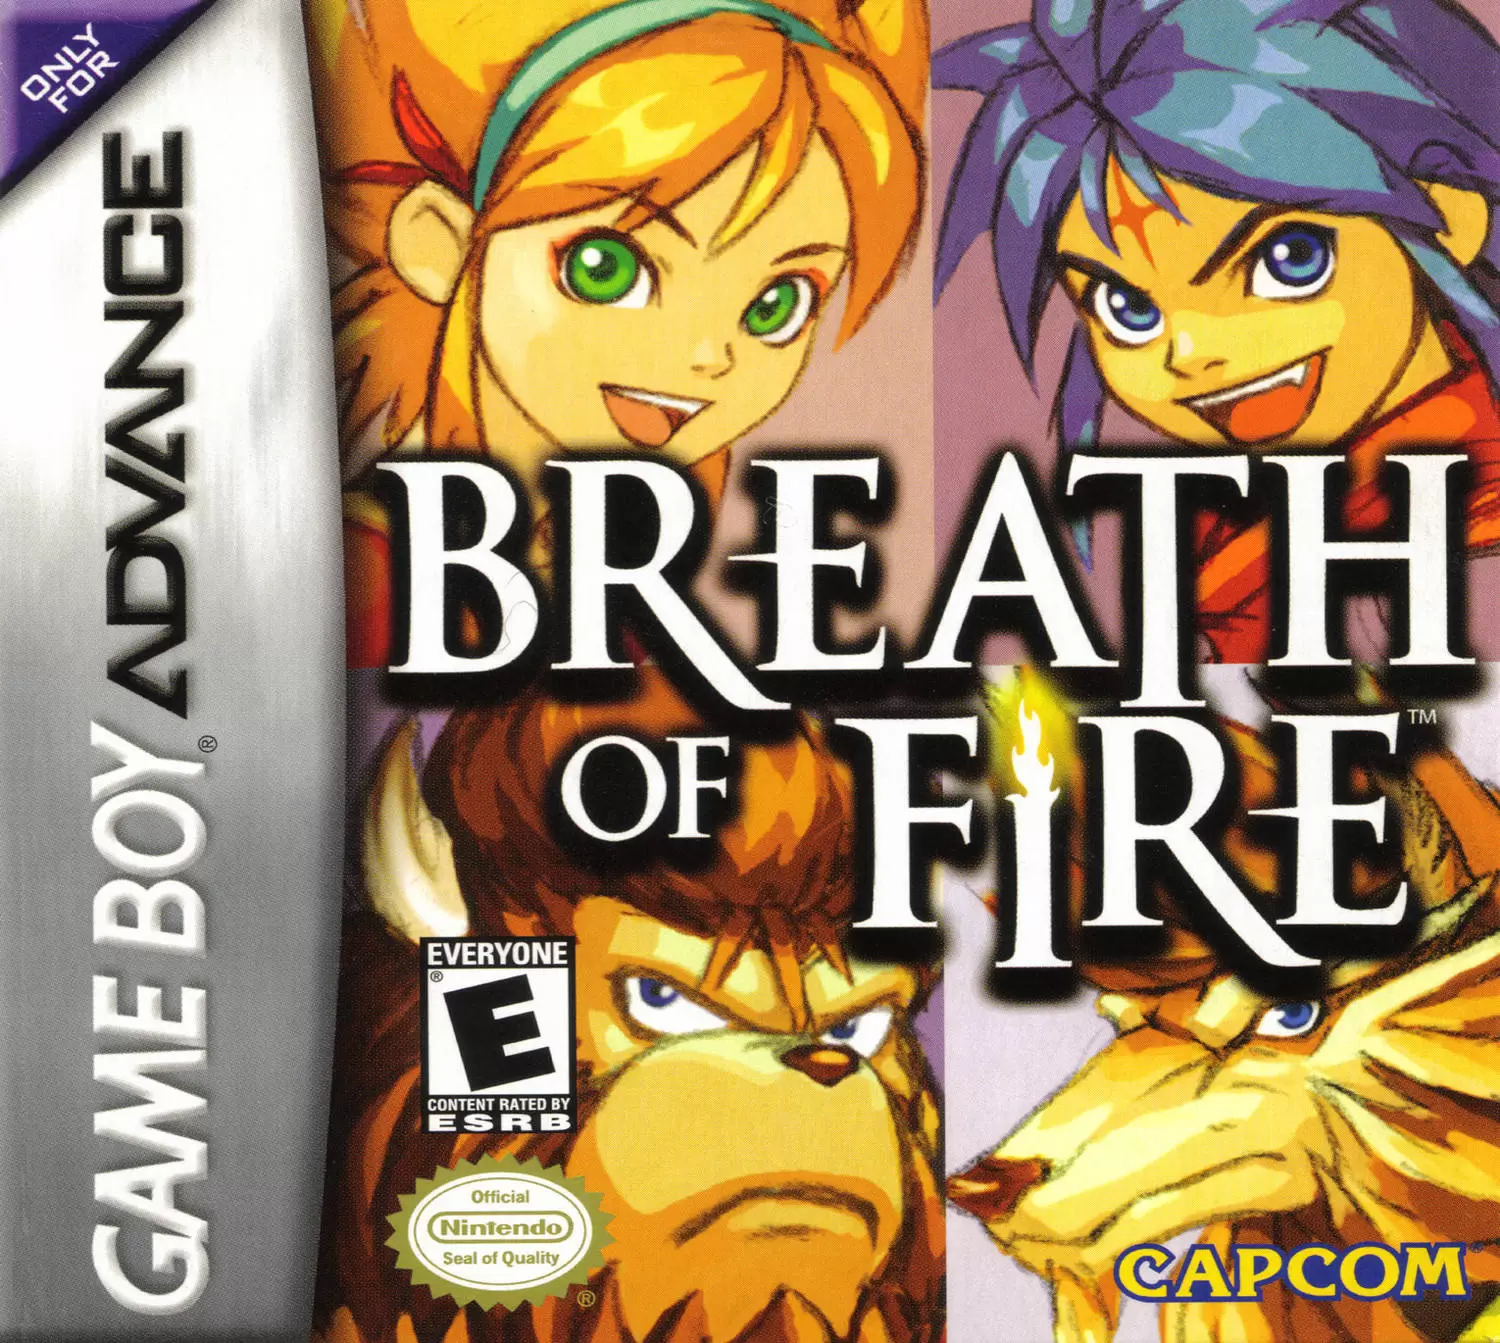 Game Boy Advance Games - Breath of Fire